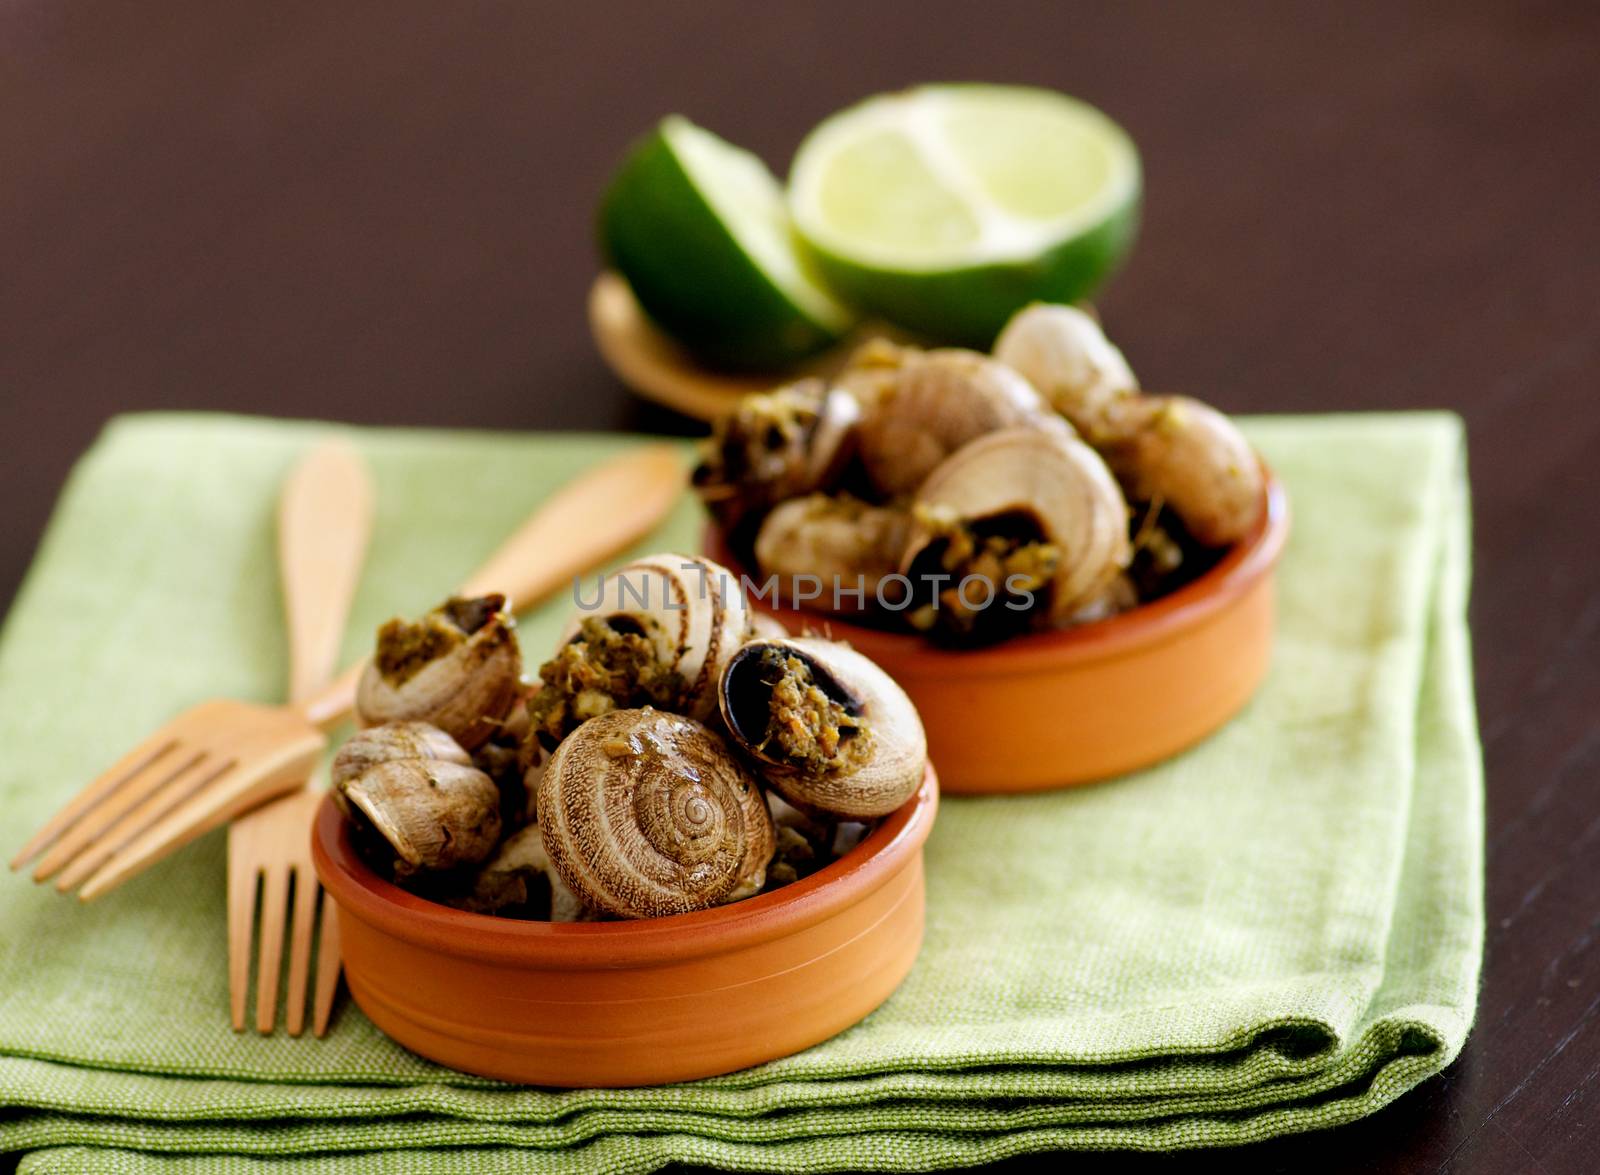 Delicious Escargot with Garlic Butter in Two Bowls with Wooden Forks and Halves of Lime closeup on Green Napkin. Focus on Foreground